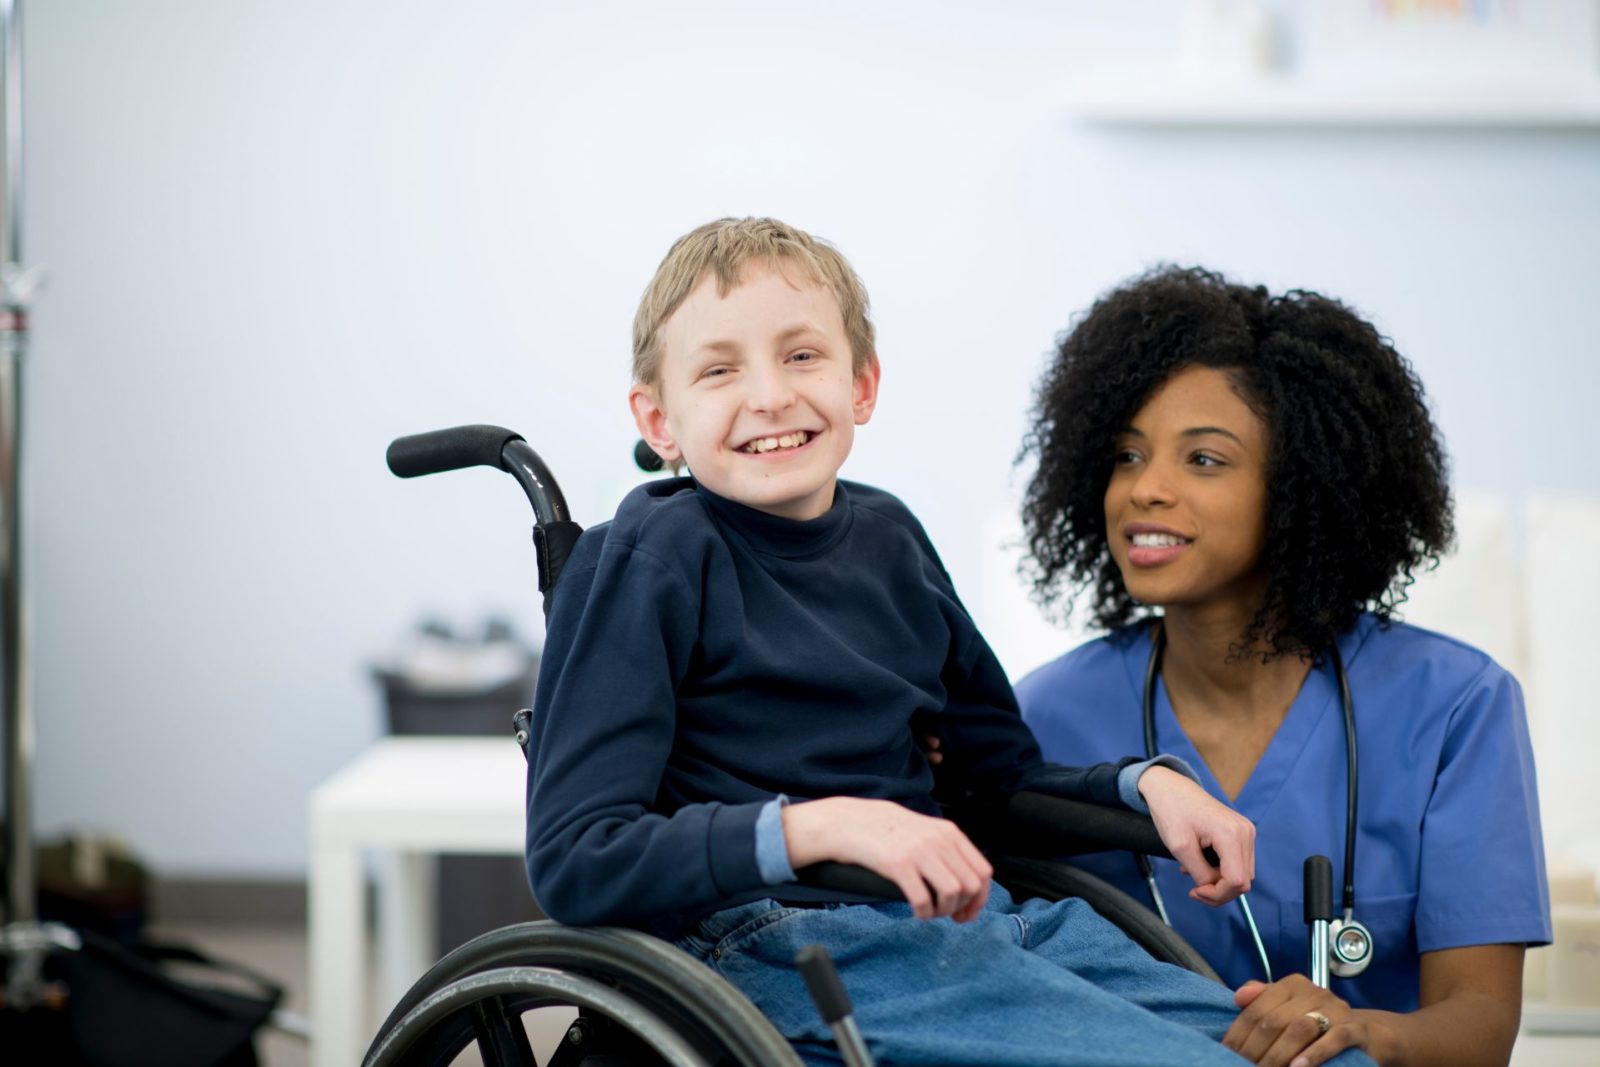 5 Common Causes of Cerebral Palsy You Should Know About